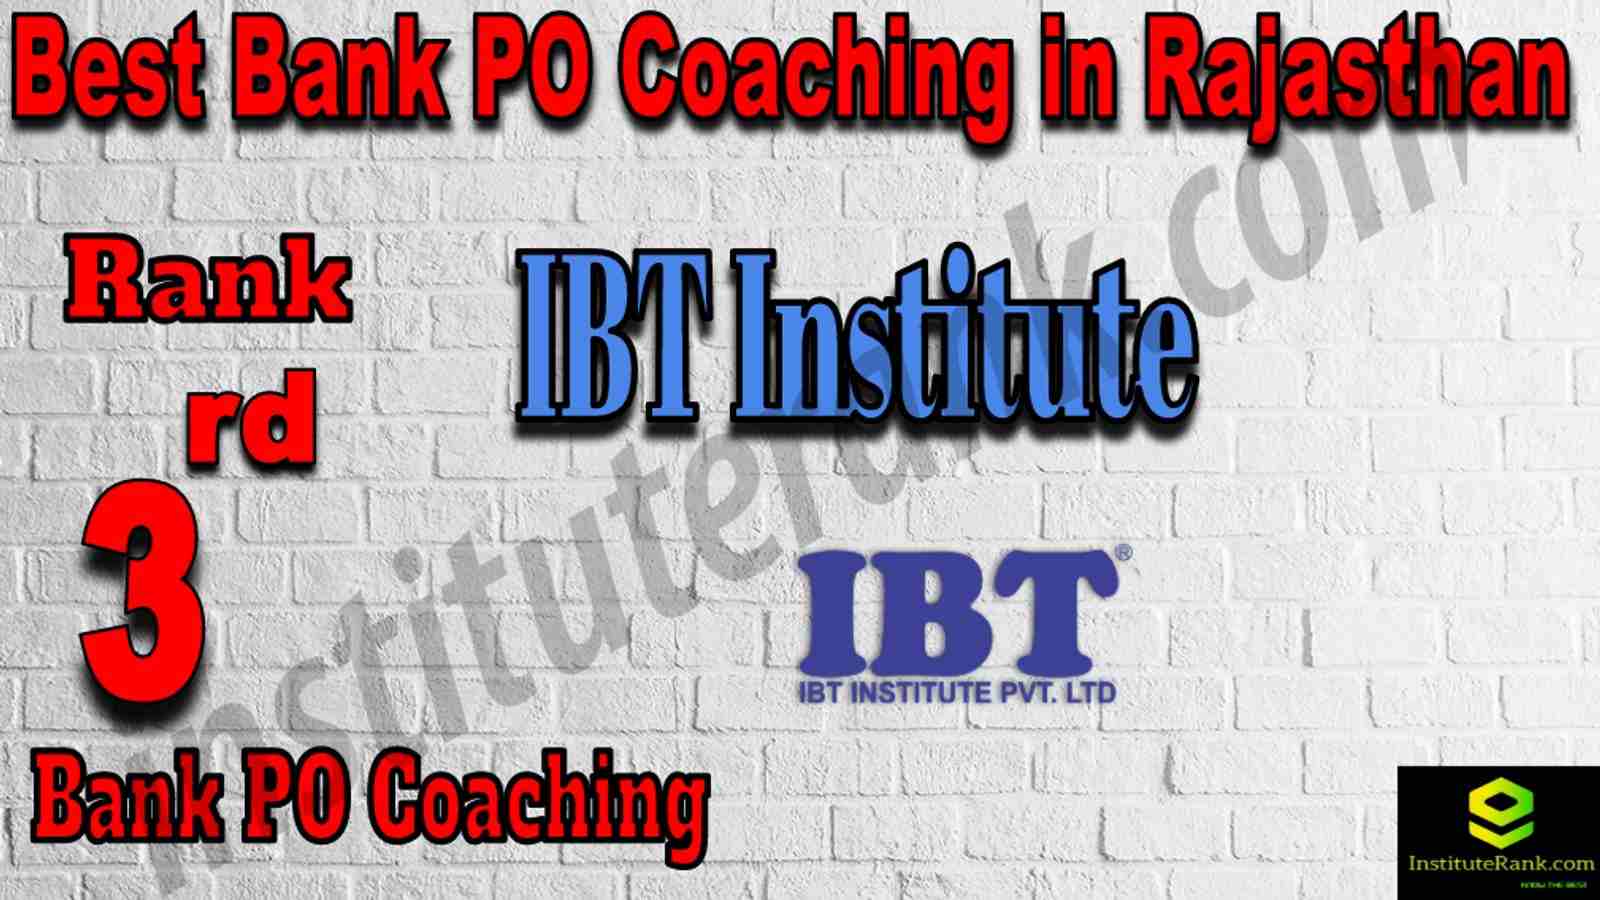 3rd Best Bank PO Coaching in Rajasthan